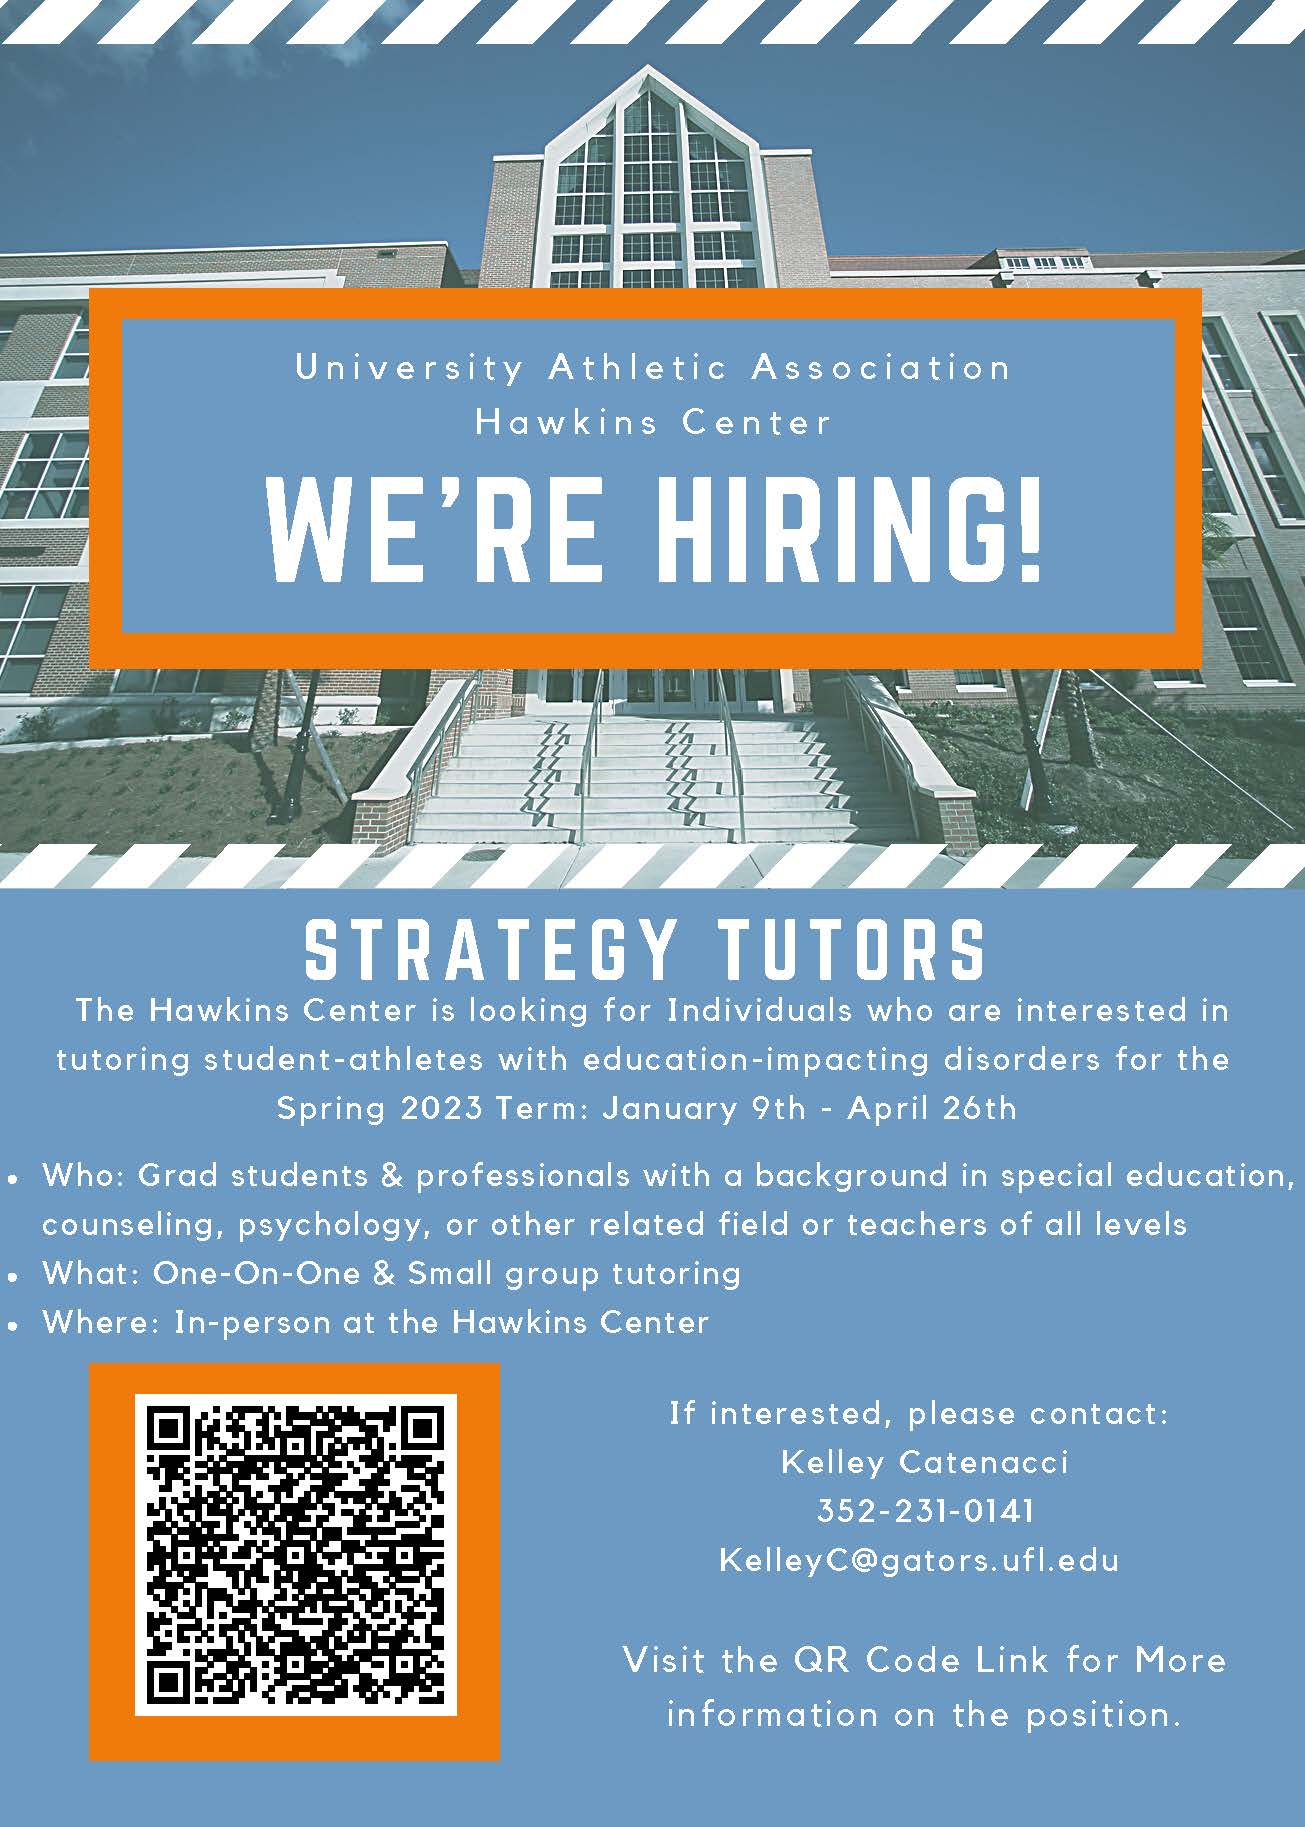 A flyer for strategy tutors. The flyer has a QR code on the bottom left corner for more information about the position.